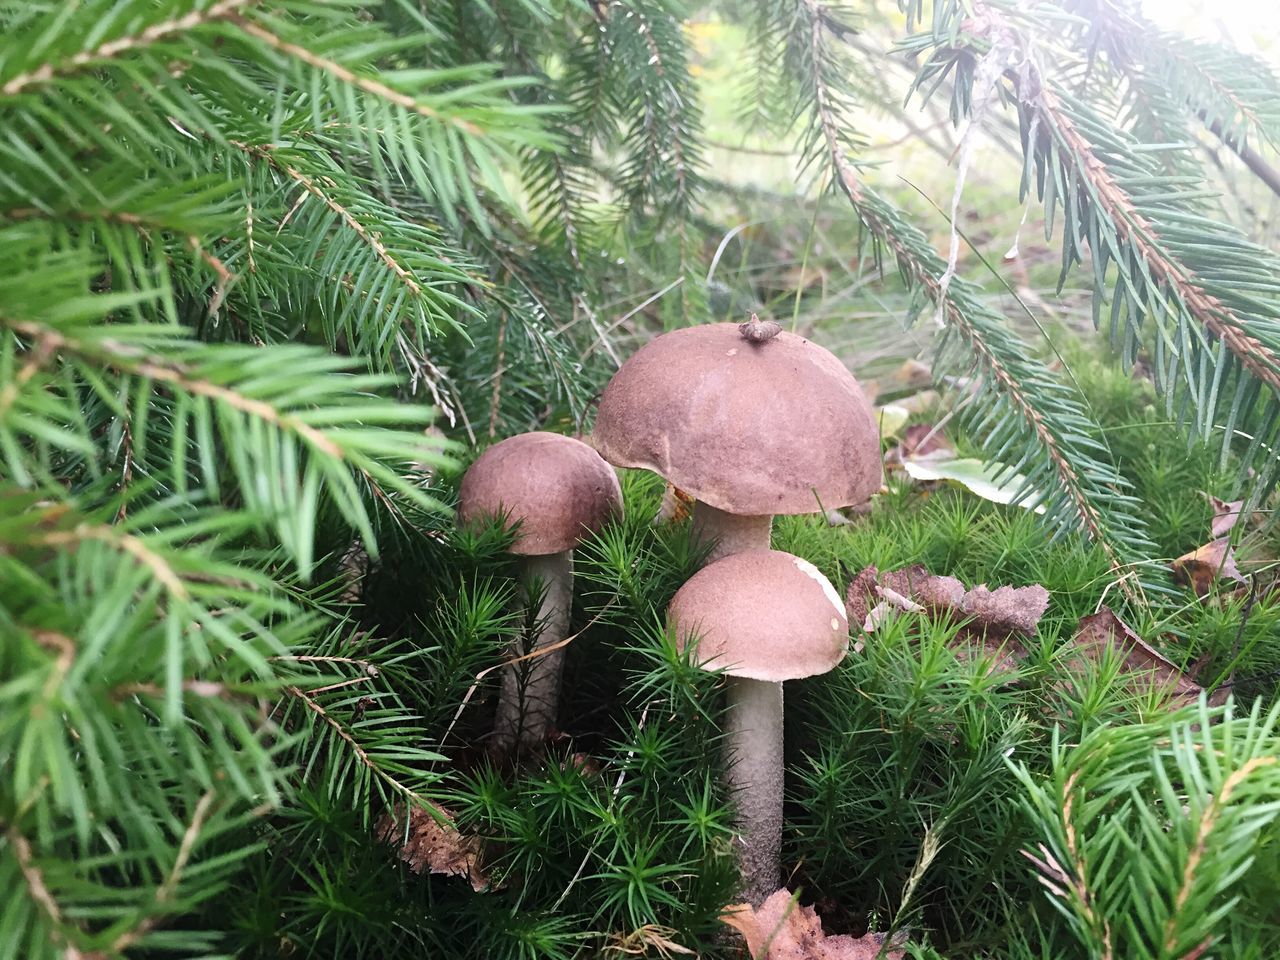 CLOSE-UP OF MUSHROOMS GROWING AMIDST PLANTS